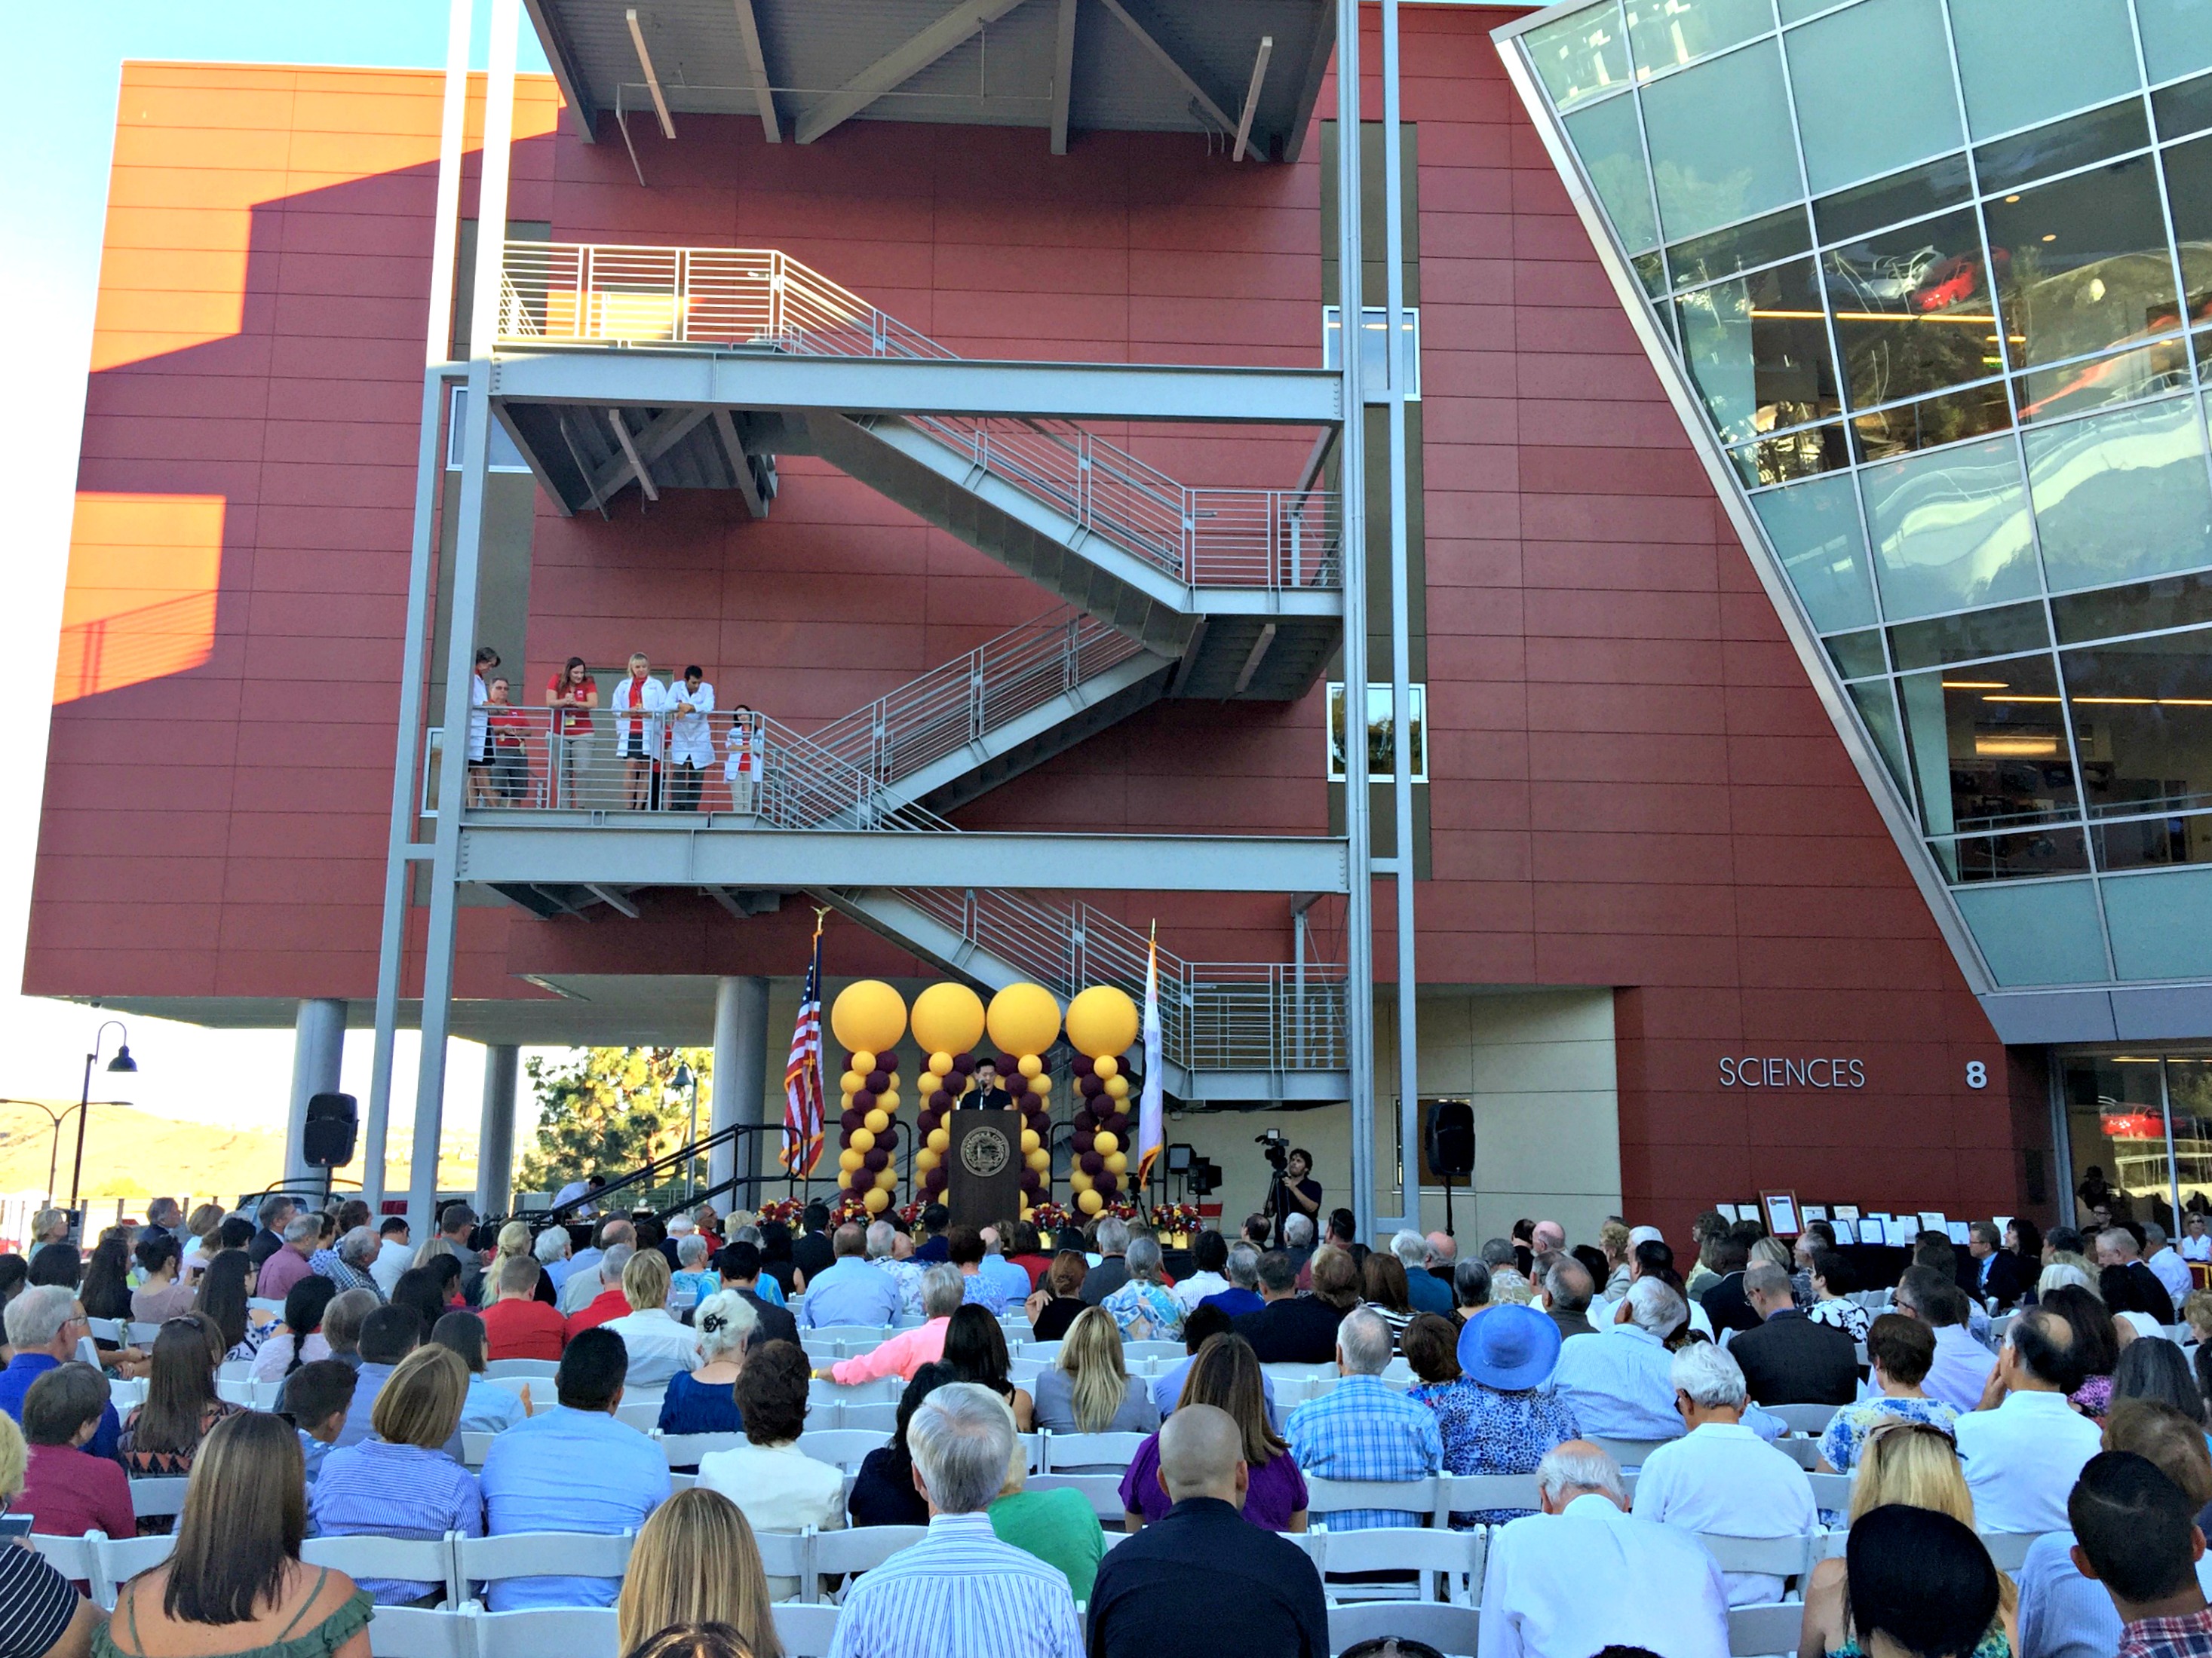 An image of a speaker outside the new Science Building at Saddleback College